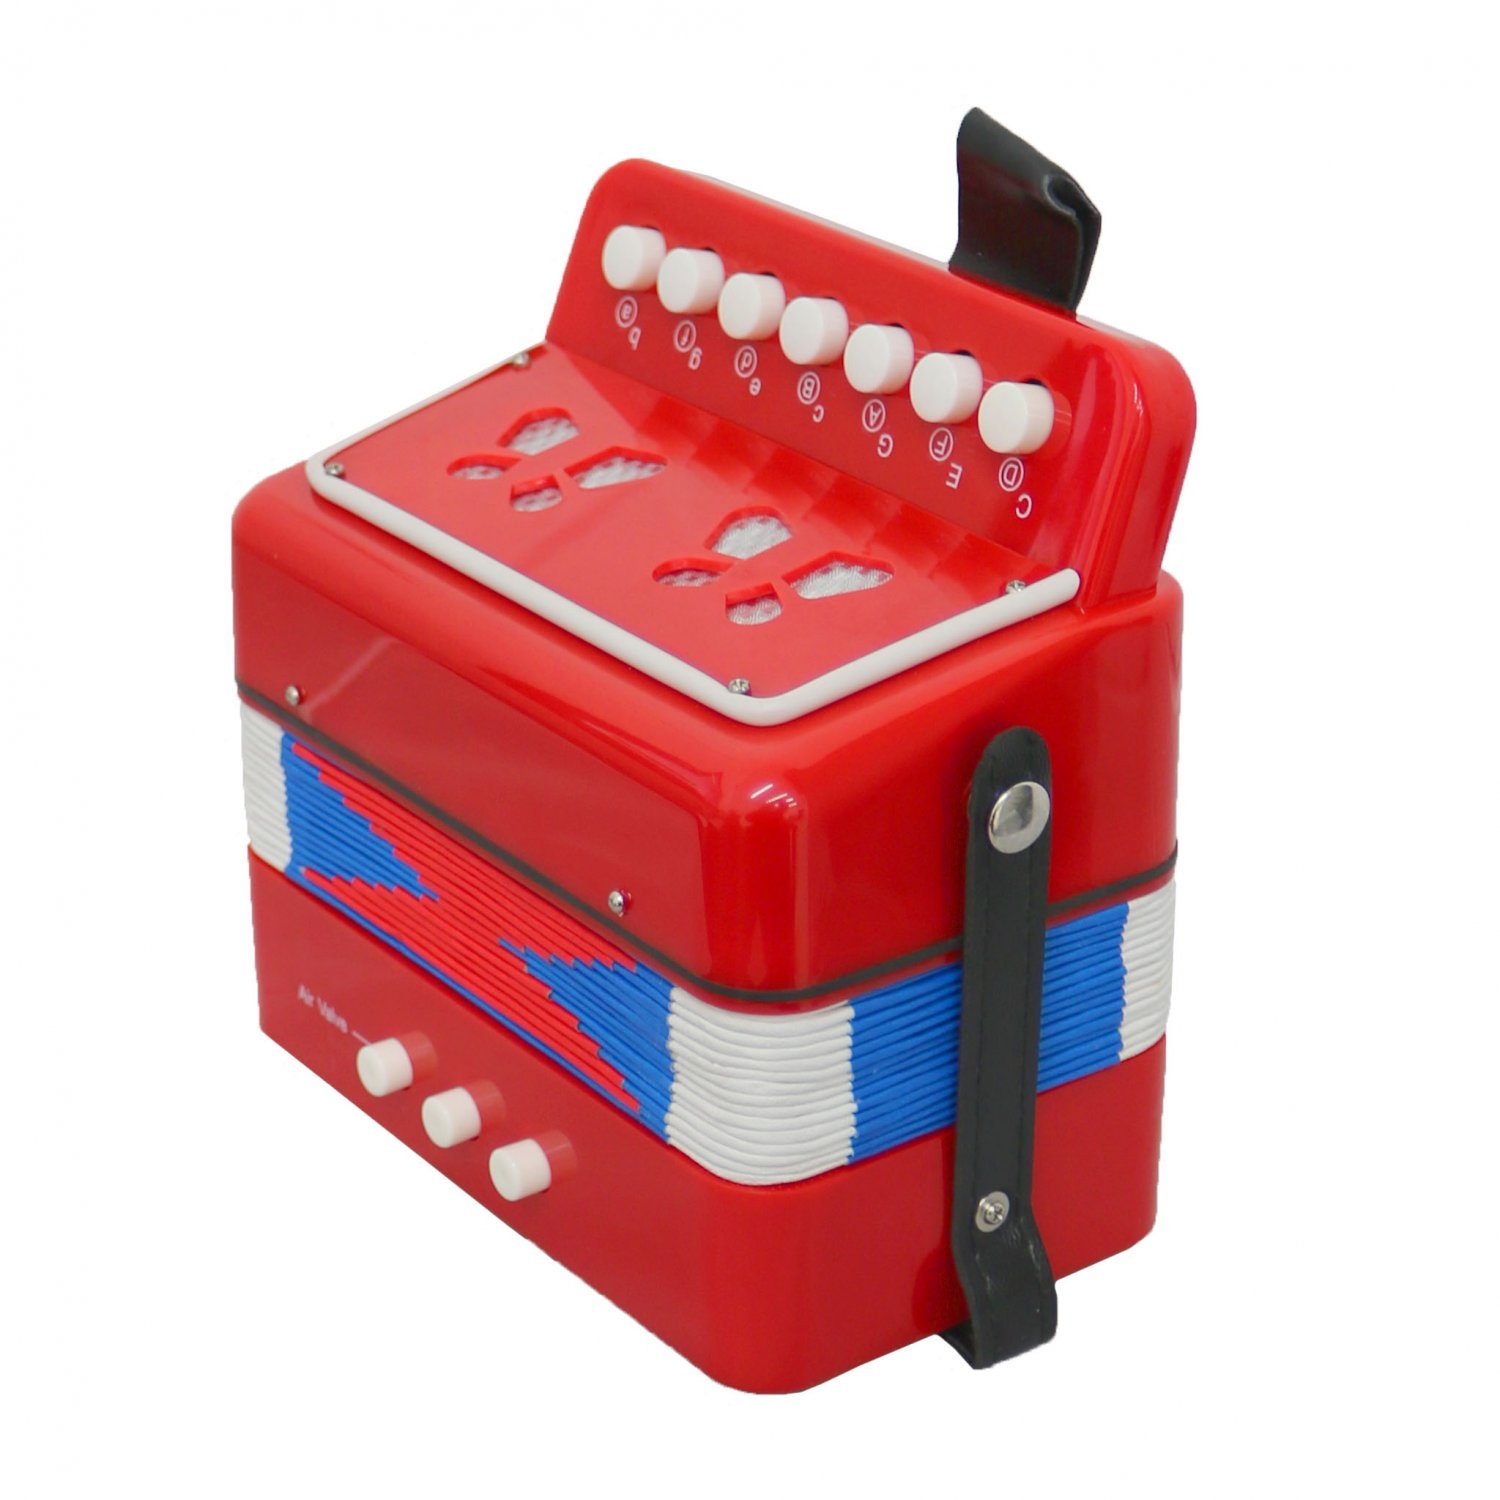 Oypla 7 Keys 2 Bass Childrens Red Toy Accordion Musical Instrument 3628A2P